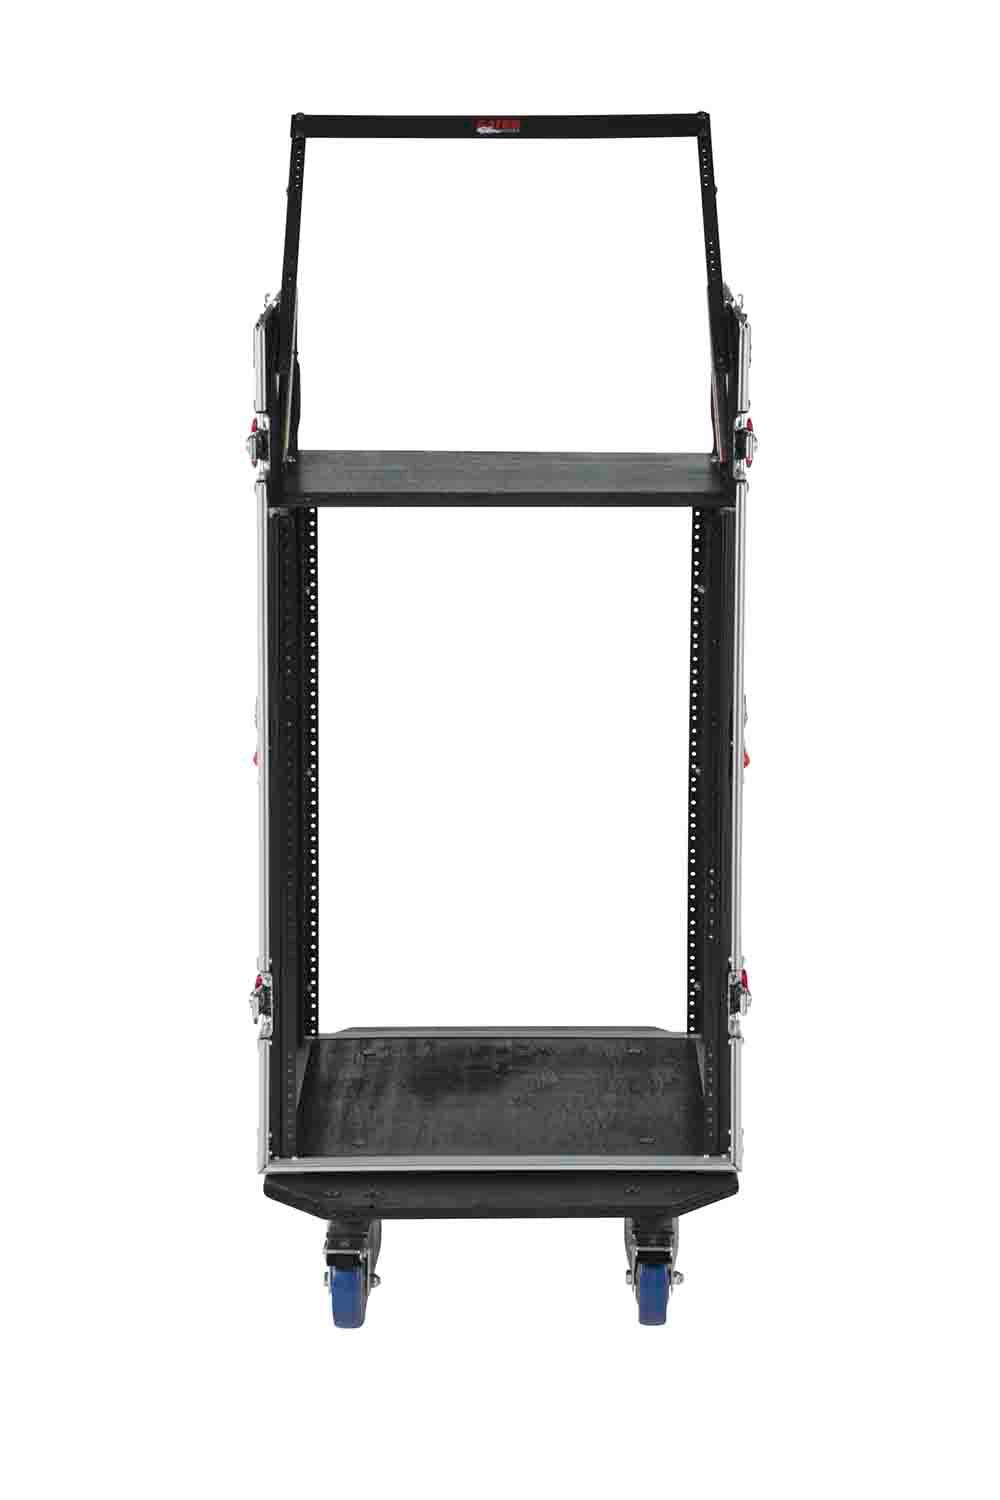 Gator Cases G-TOUR 10X16 PU, 10U Top 16U Side Console Rack Case with Casters - Hollywood DJ